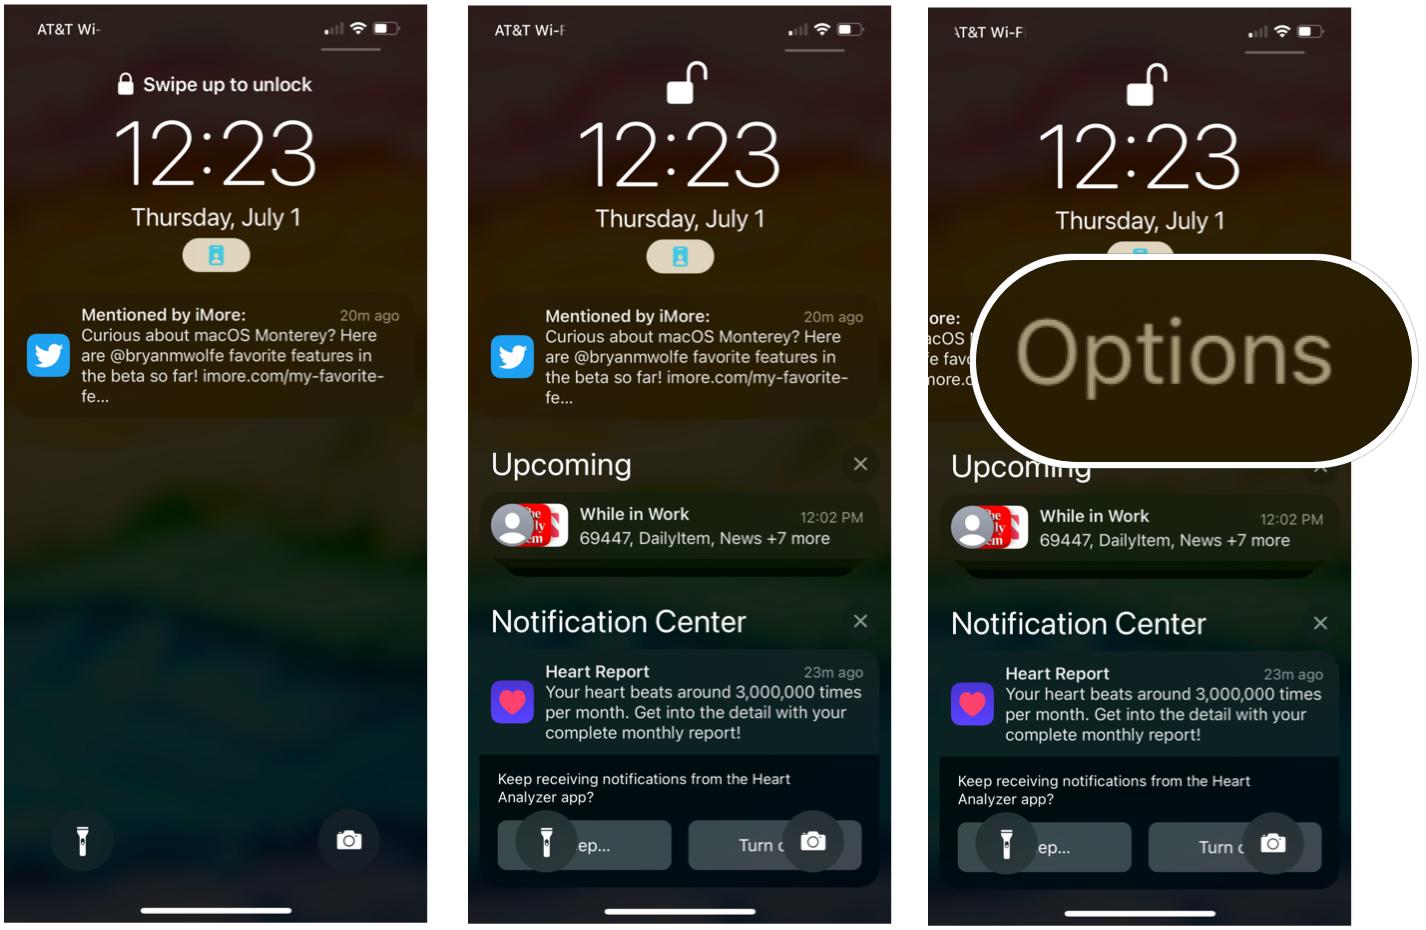 To manage notifications from Notification Center in iOS 15, unlock your mobile device, then swipe down to access Notification Center. Next, swipe to the left on a Notification to view your options. 